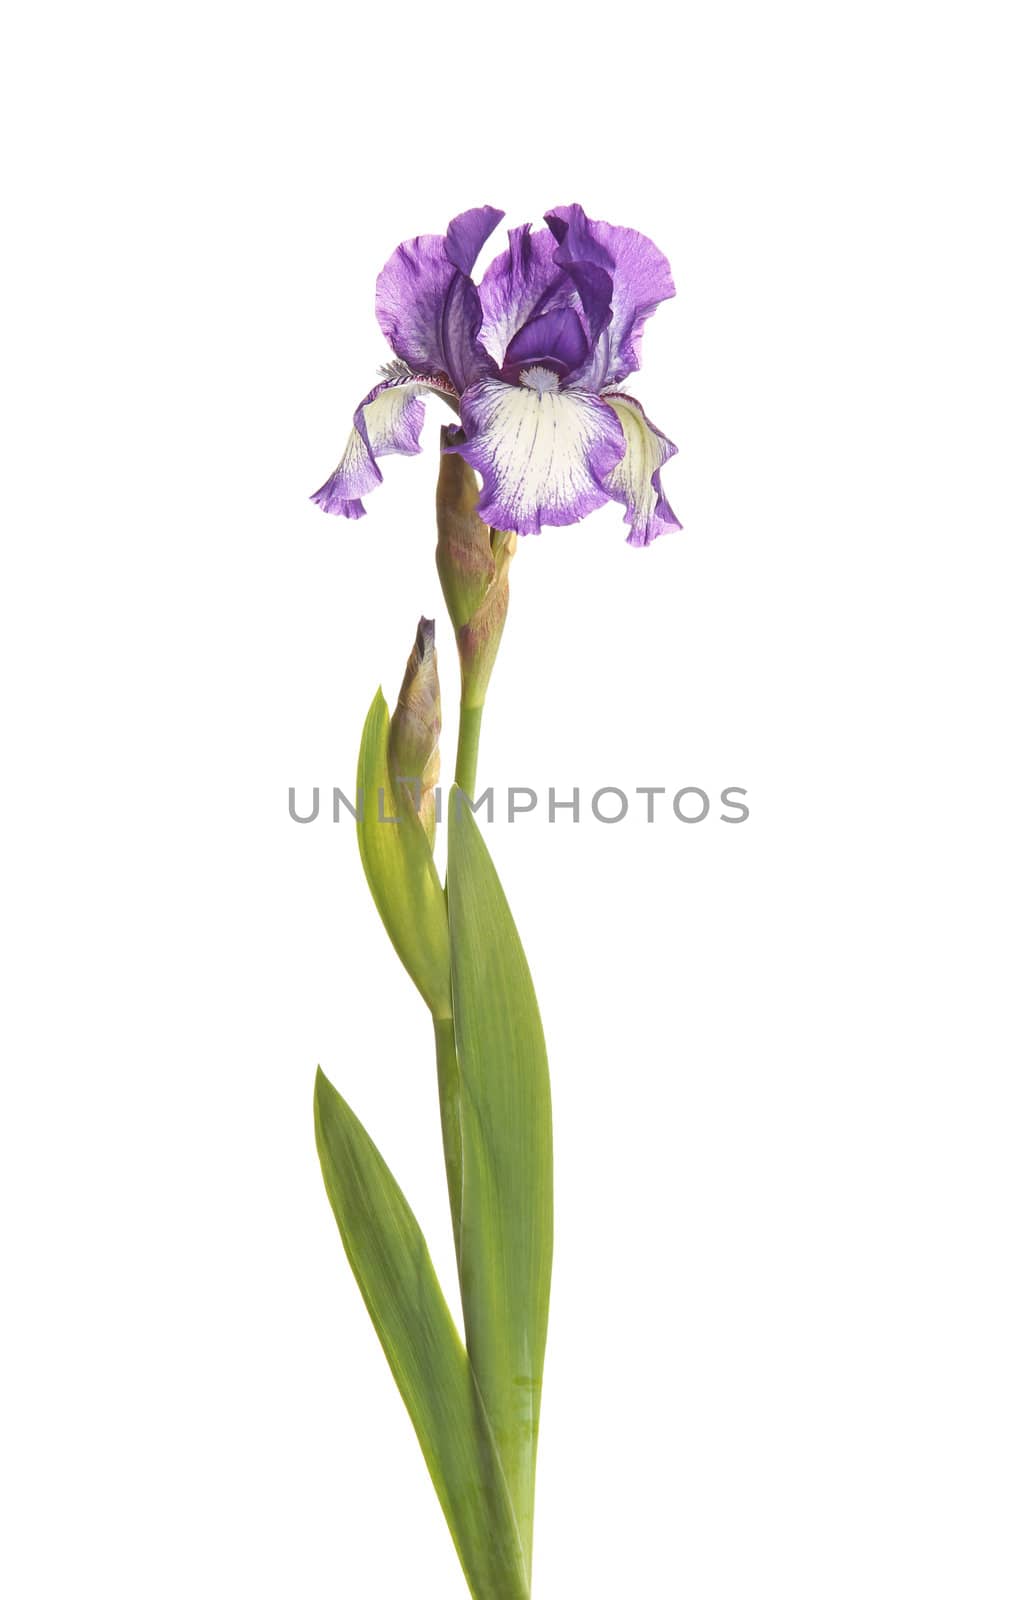 Stem with a purple and white iris flower isolated by sgoodwin4813